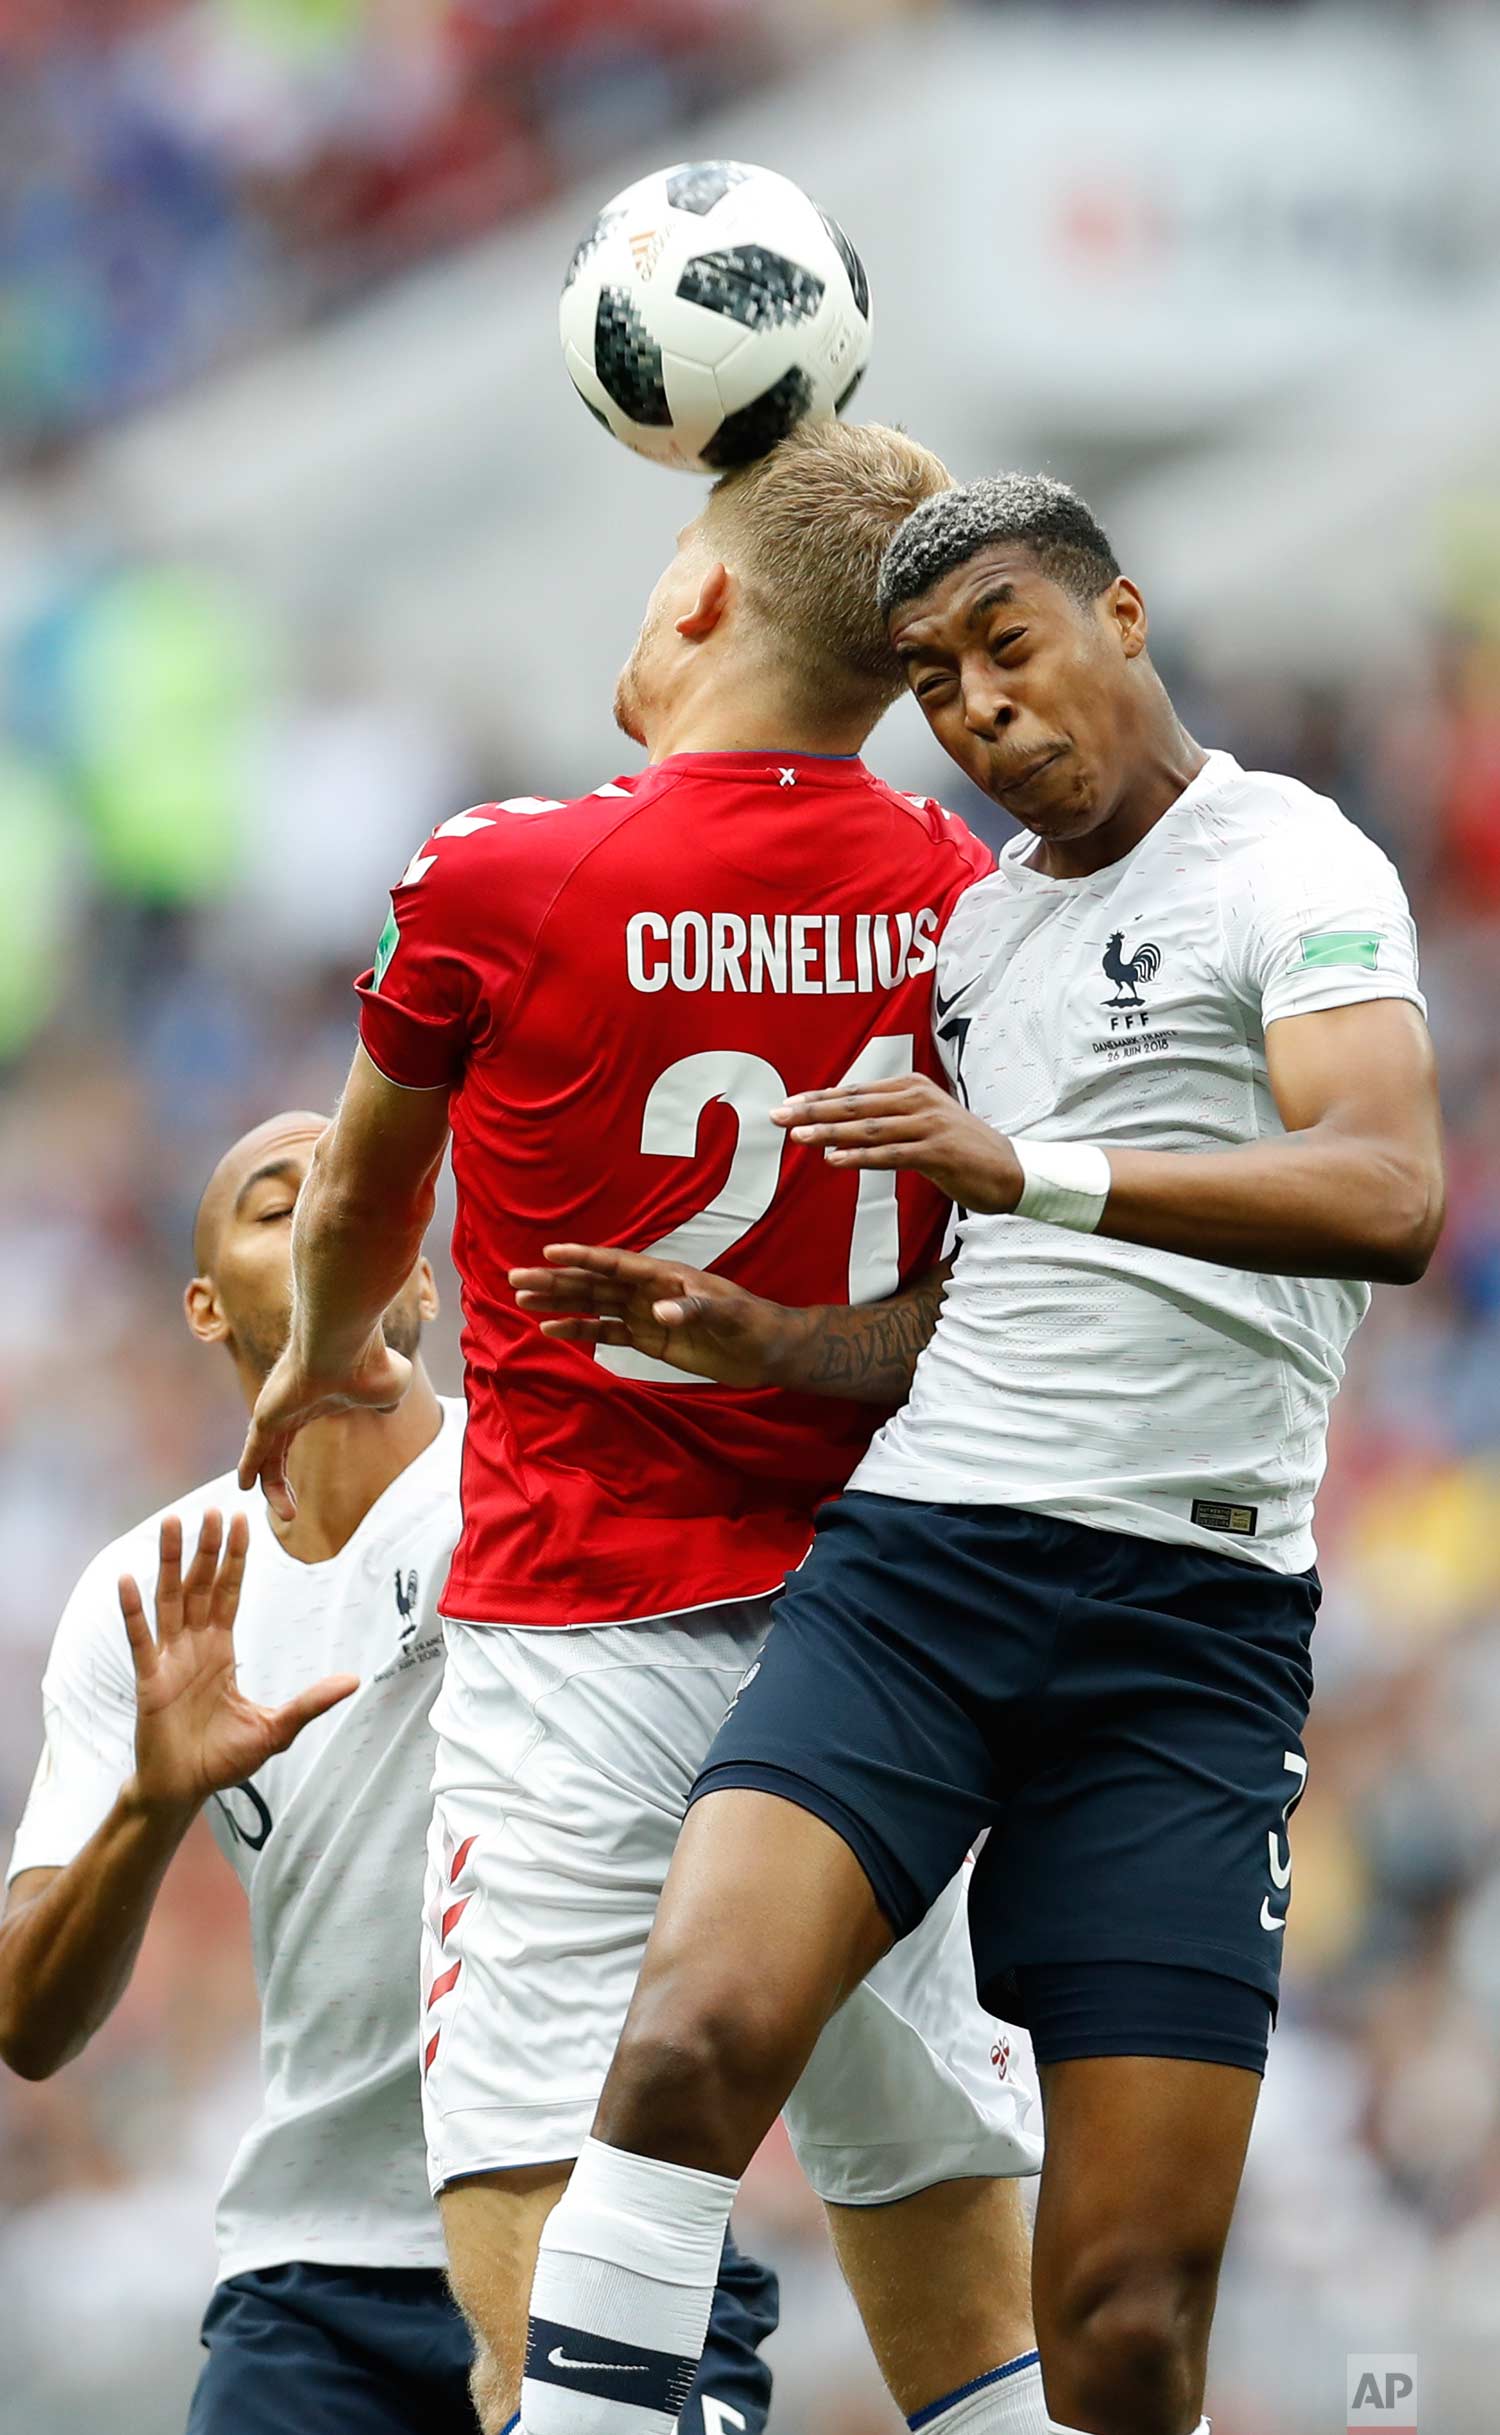  Denmark's Andreas Cornelius goes for a header with France's Presnel Kimpembe during the group C match between Denmark and France at the 2018 soccer World Cup at the Luzhniki Stadium in Moscow, Russia, Tuesday, June 26, 2018. (AP Photo/Antonio Calann